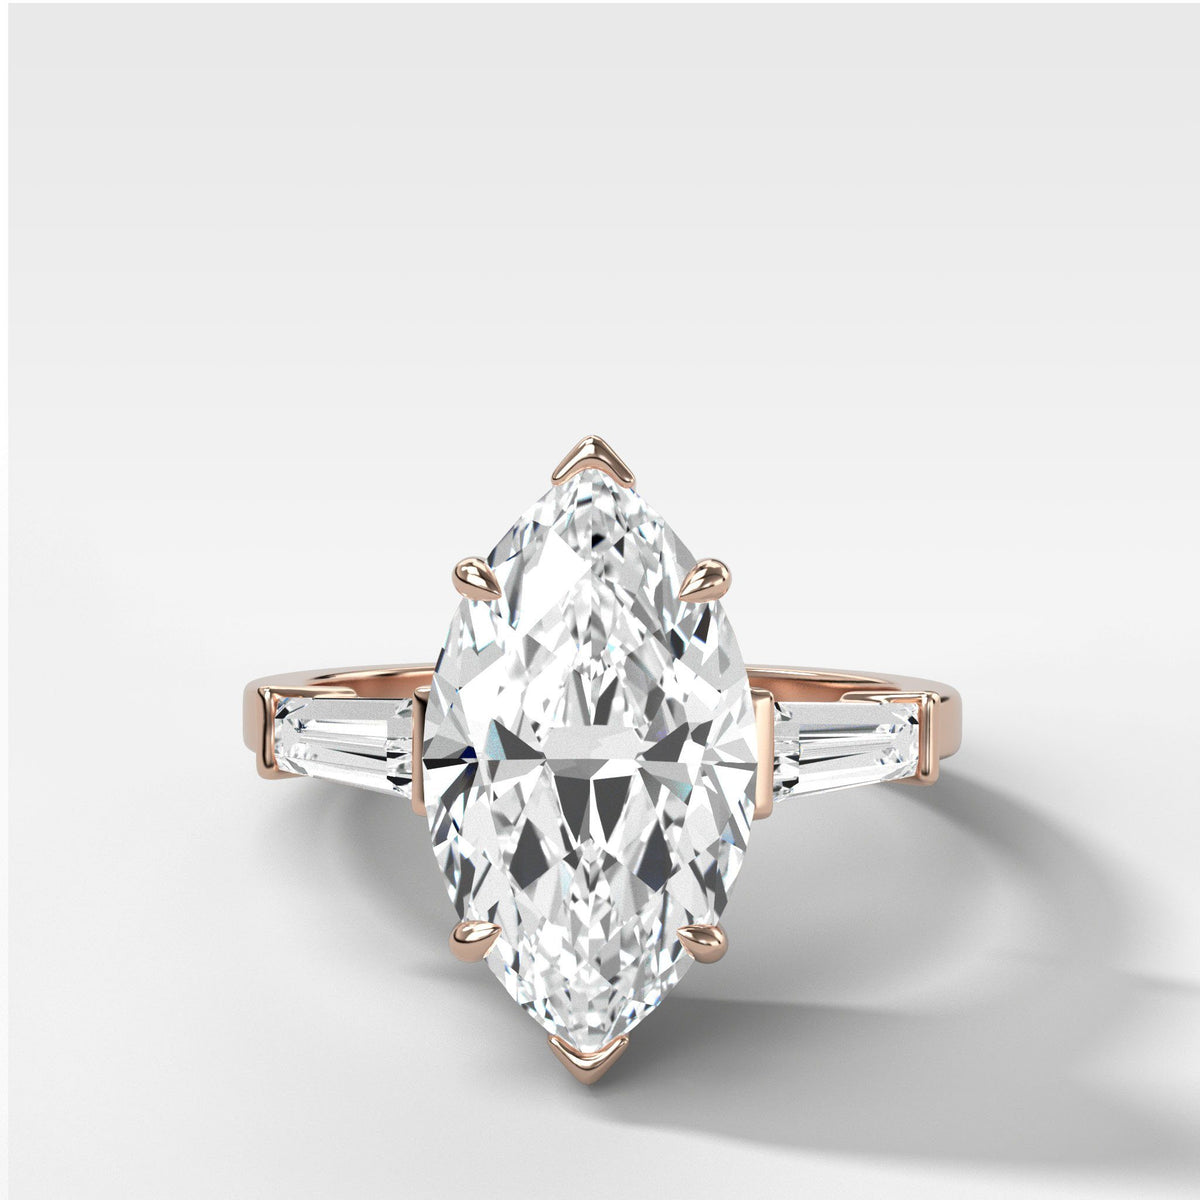 Translunar Tapered Baguette Engagement Ring With Marquise Cut by Good Stone in Rose Gold